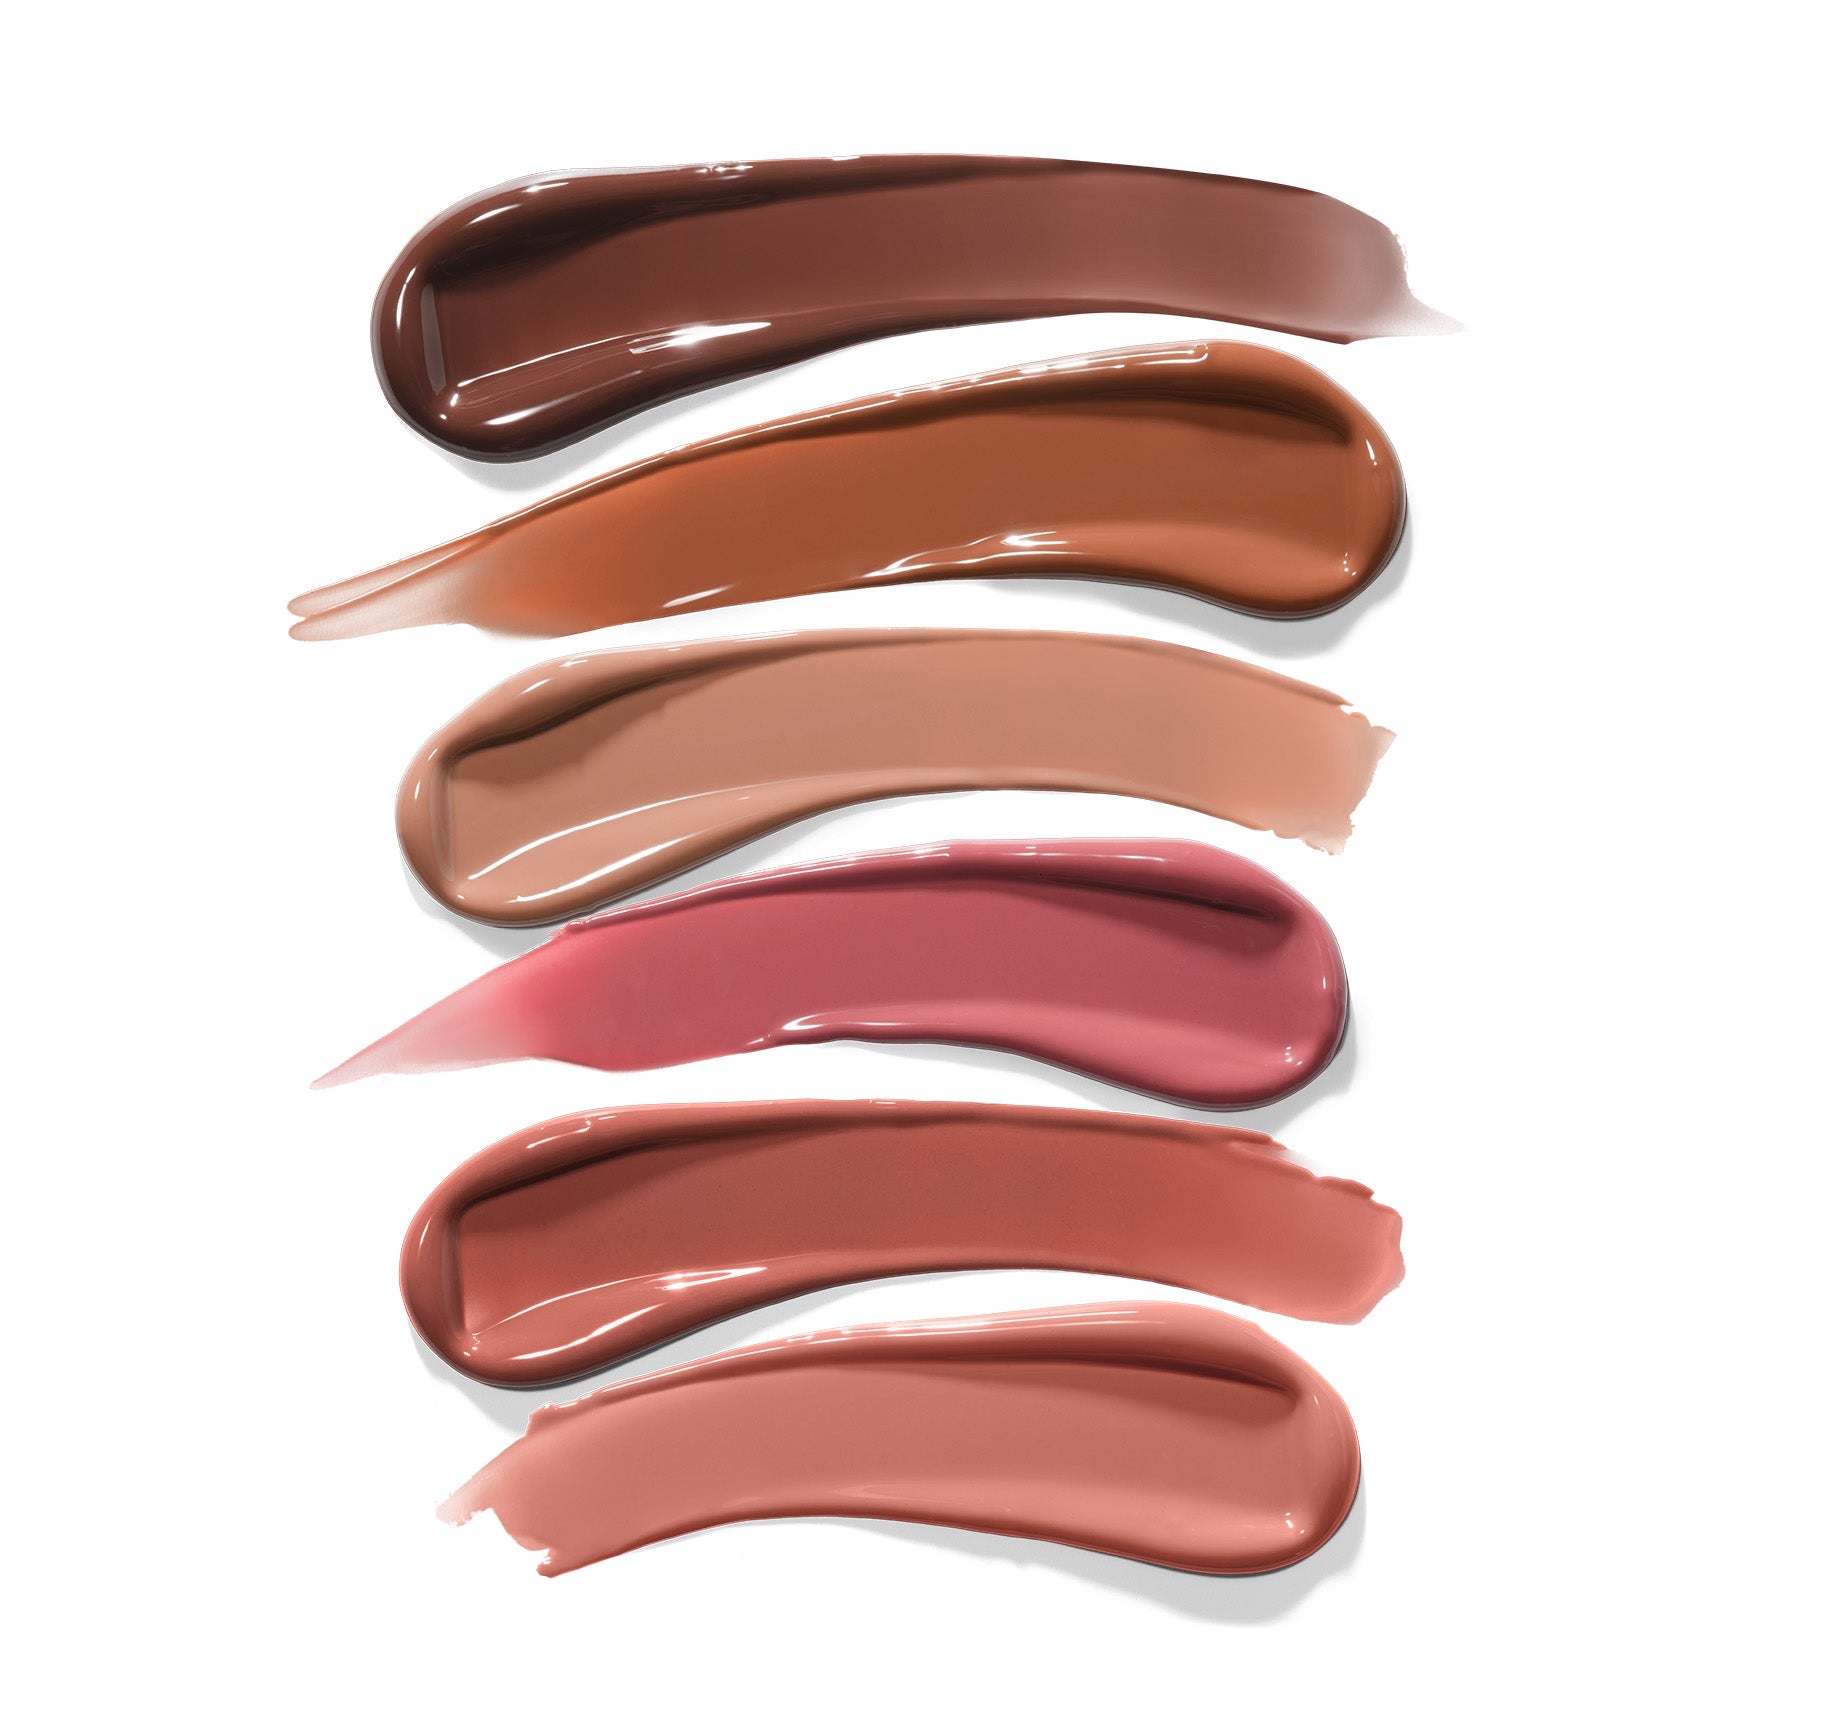 Dripglass Drenched High Pigment Lip Gloss - Naked Dip - Image 9